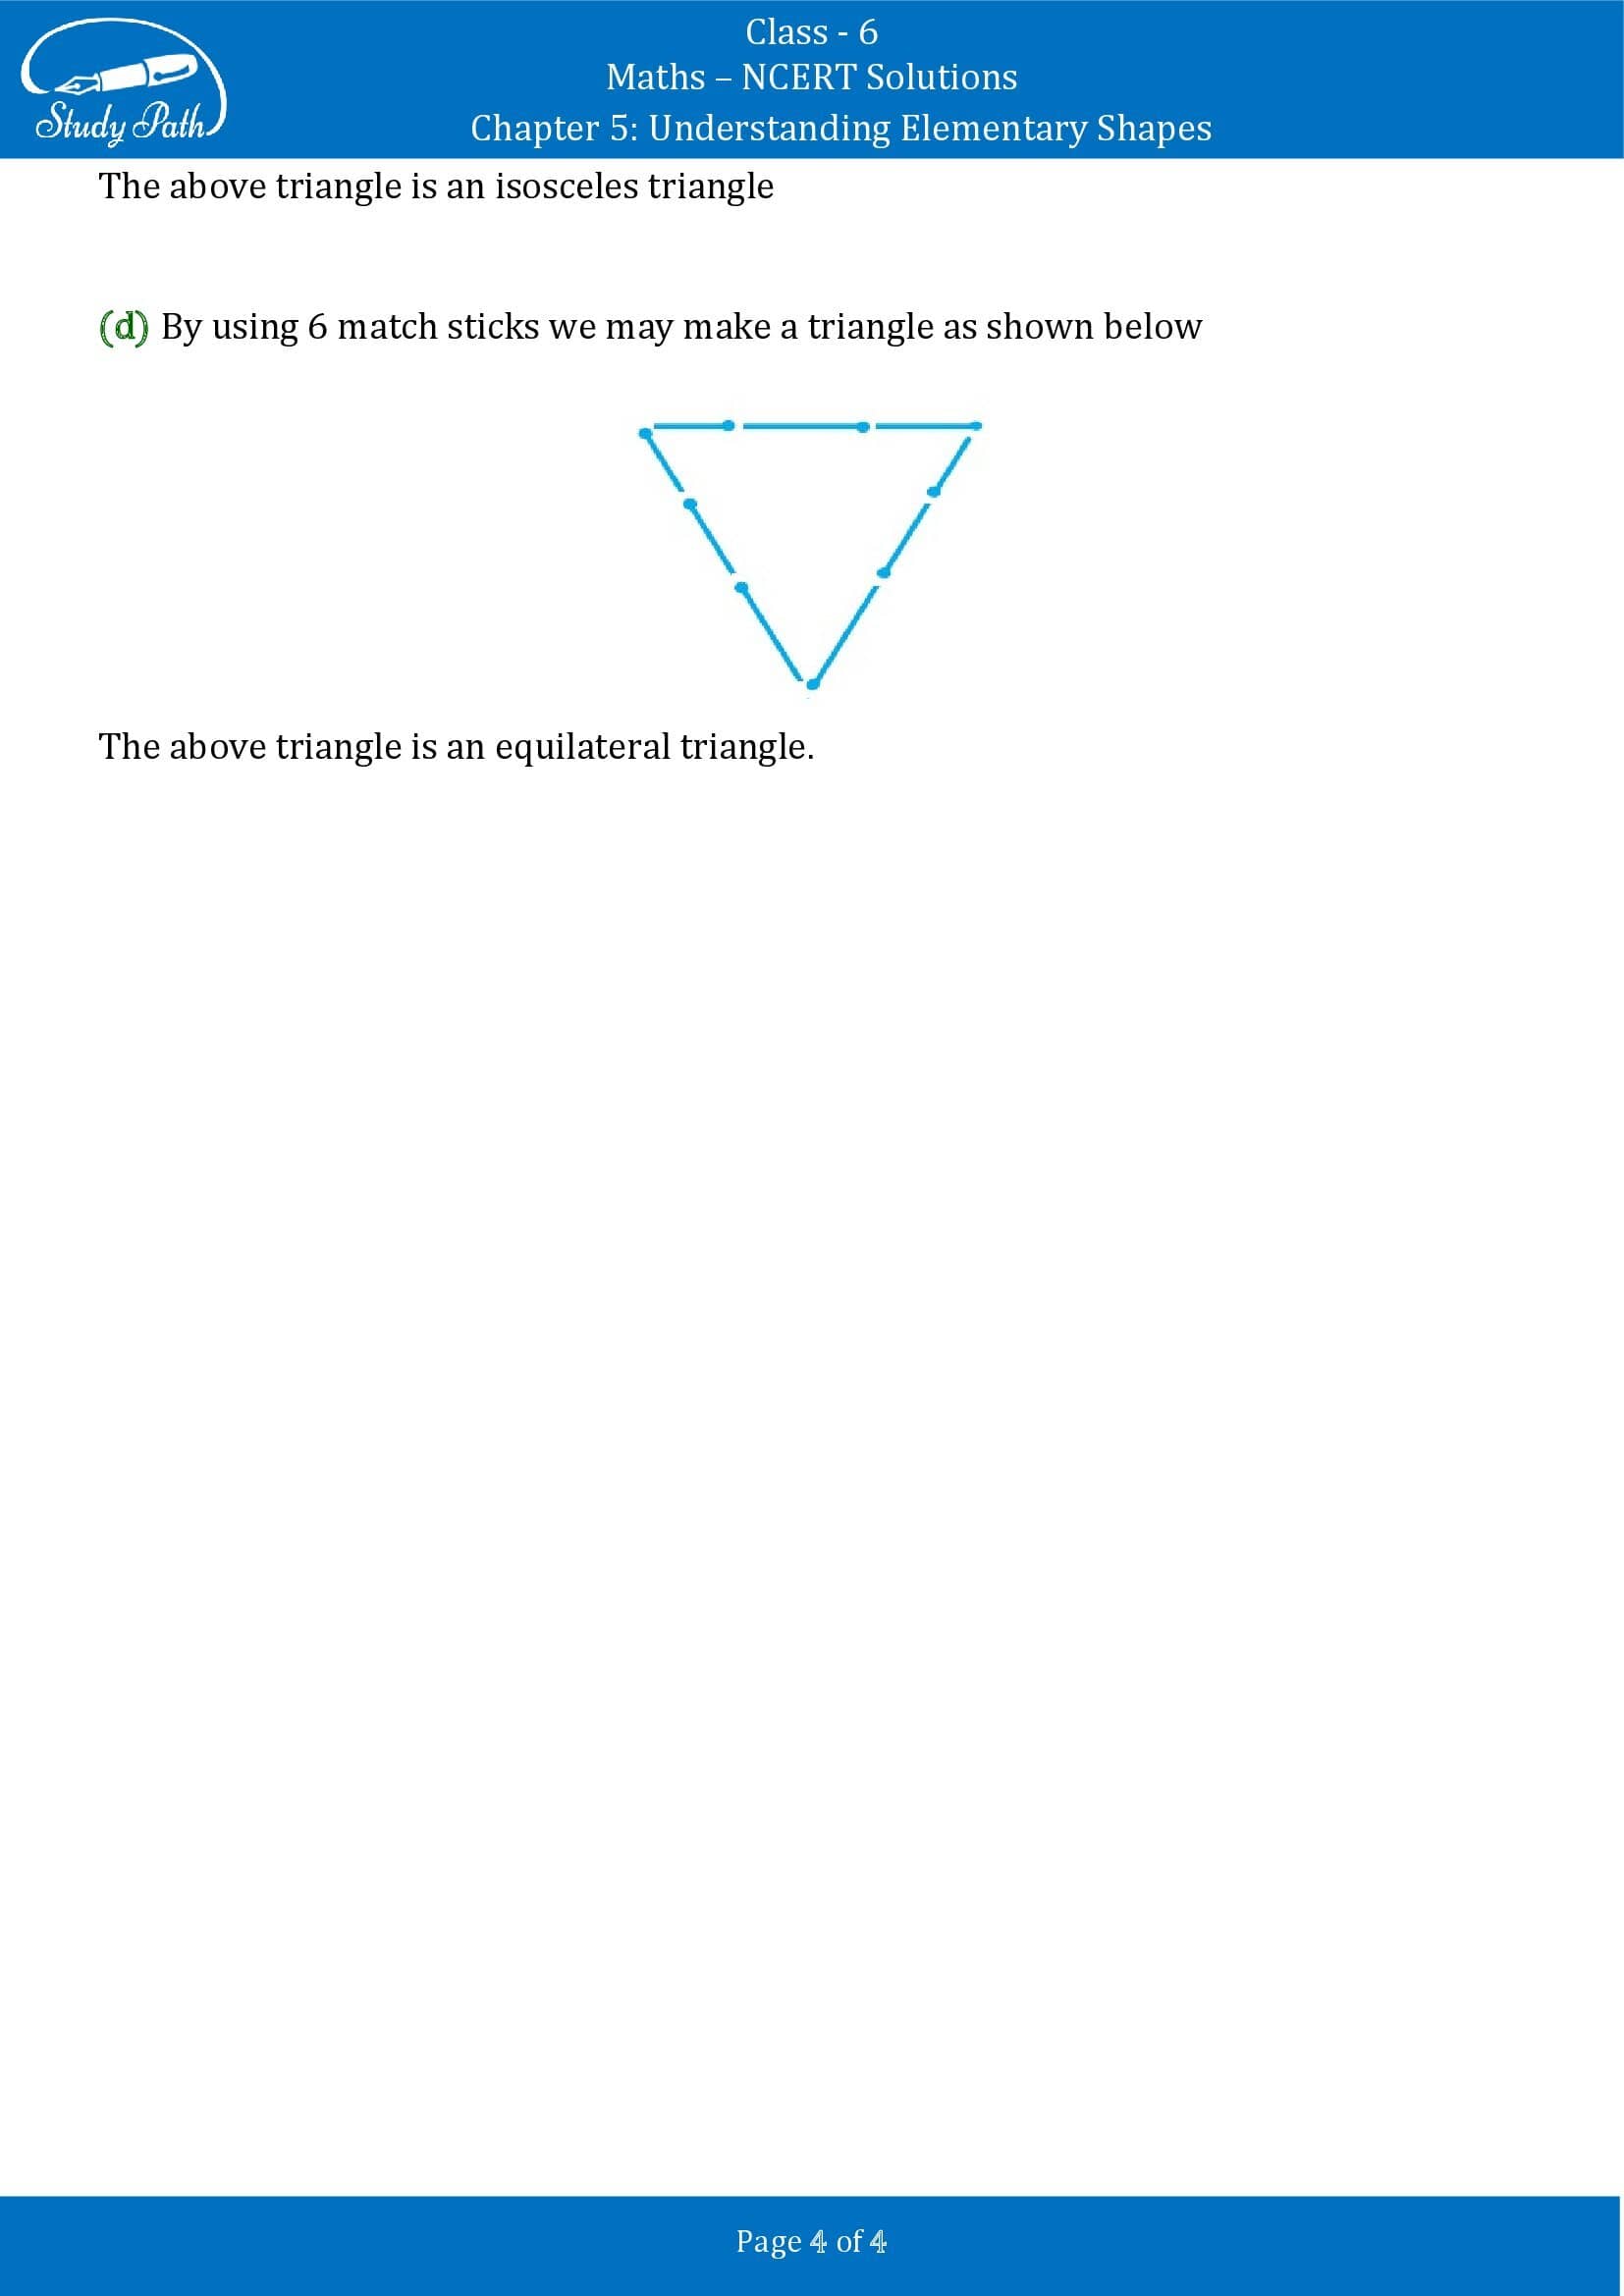 NCERT Solutions for Class 6 Maths Chapter 5 Understanding Elementary Shapes Exercise 5.6 00004